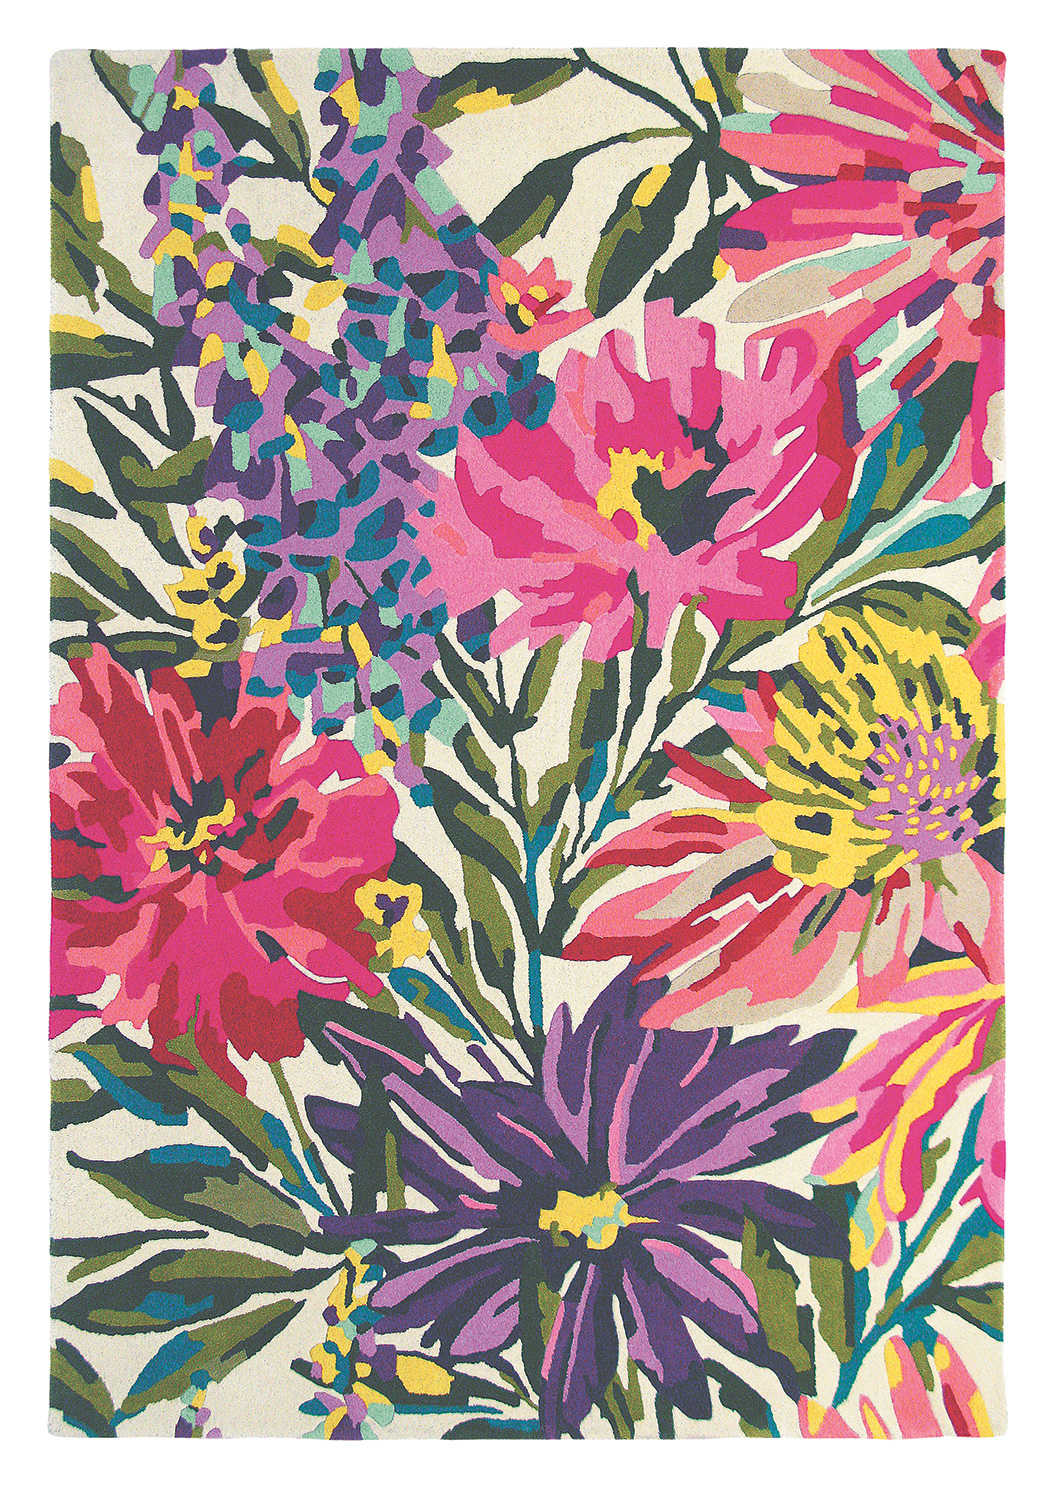 Rectangular white wool rug with pink, yellow, purple and green flowers and leaves